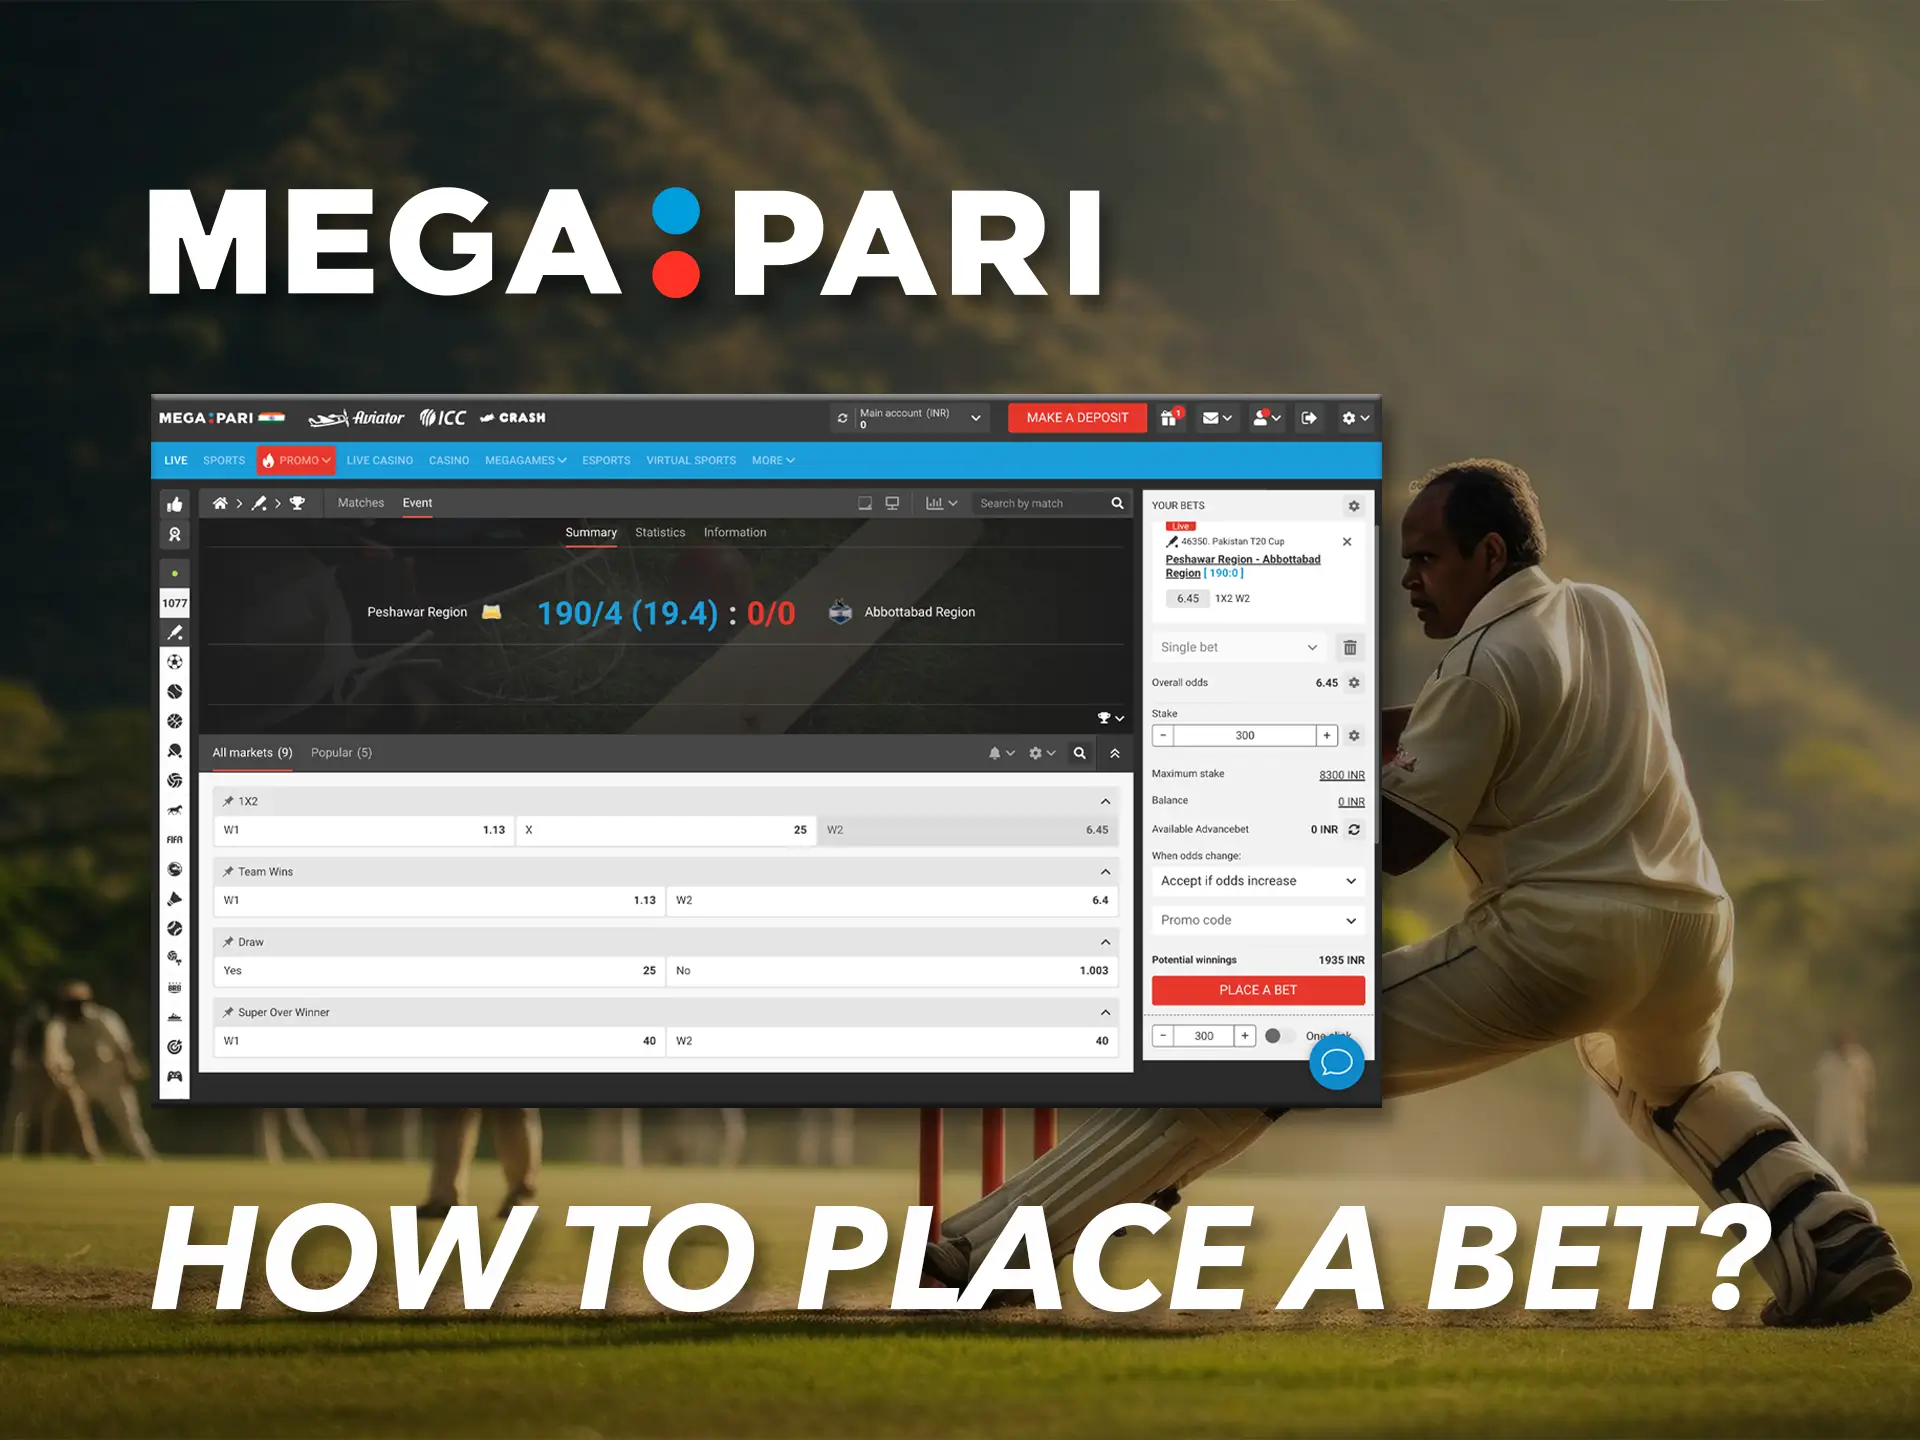 Choose your favorite team and bet on it at Megapari.